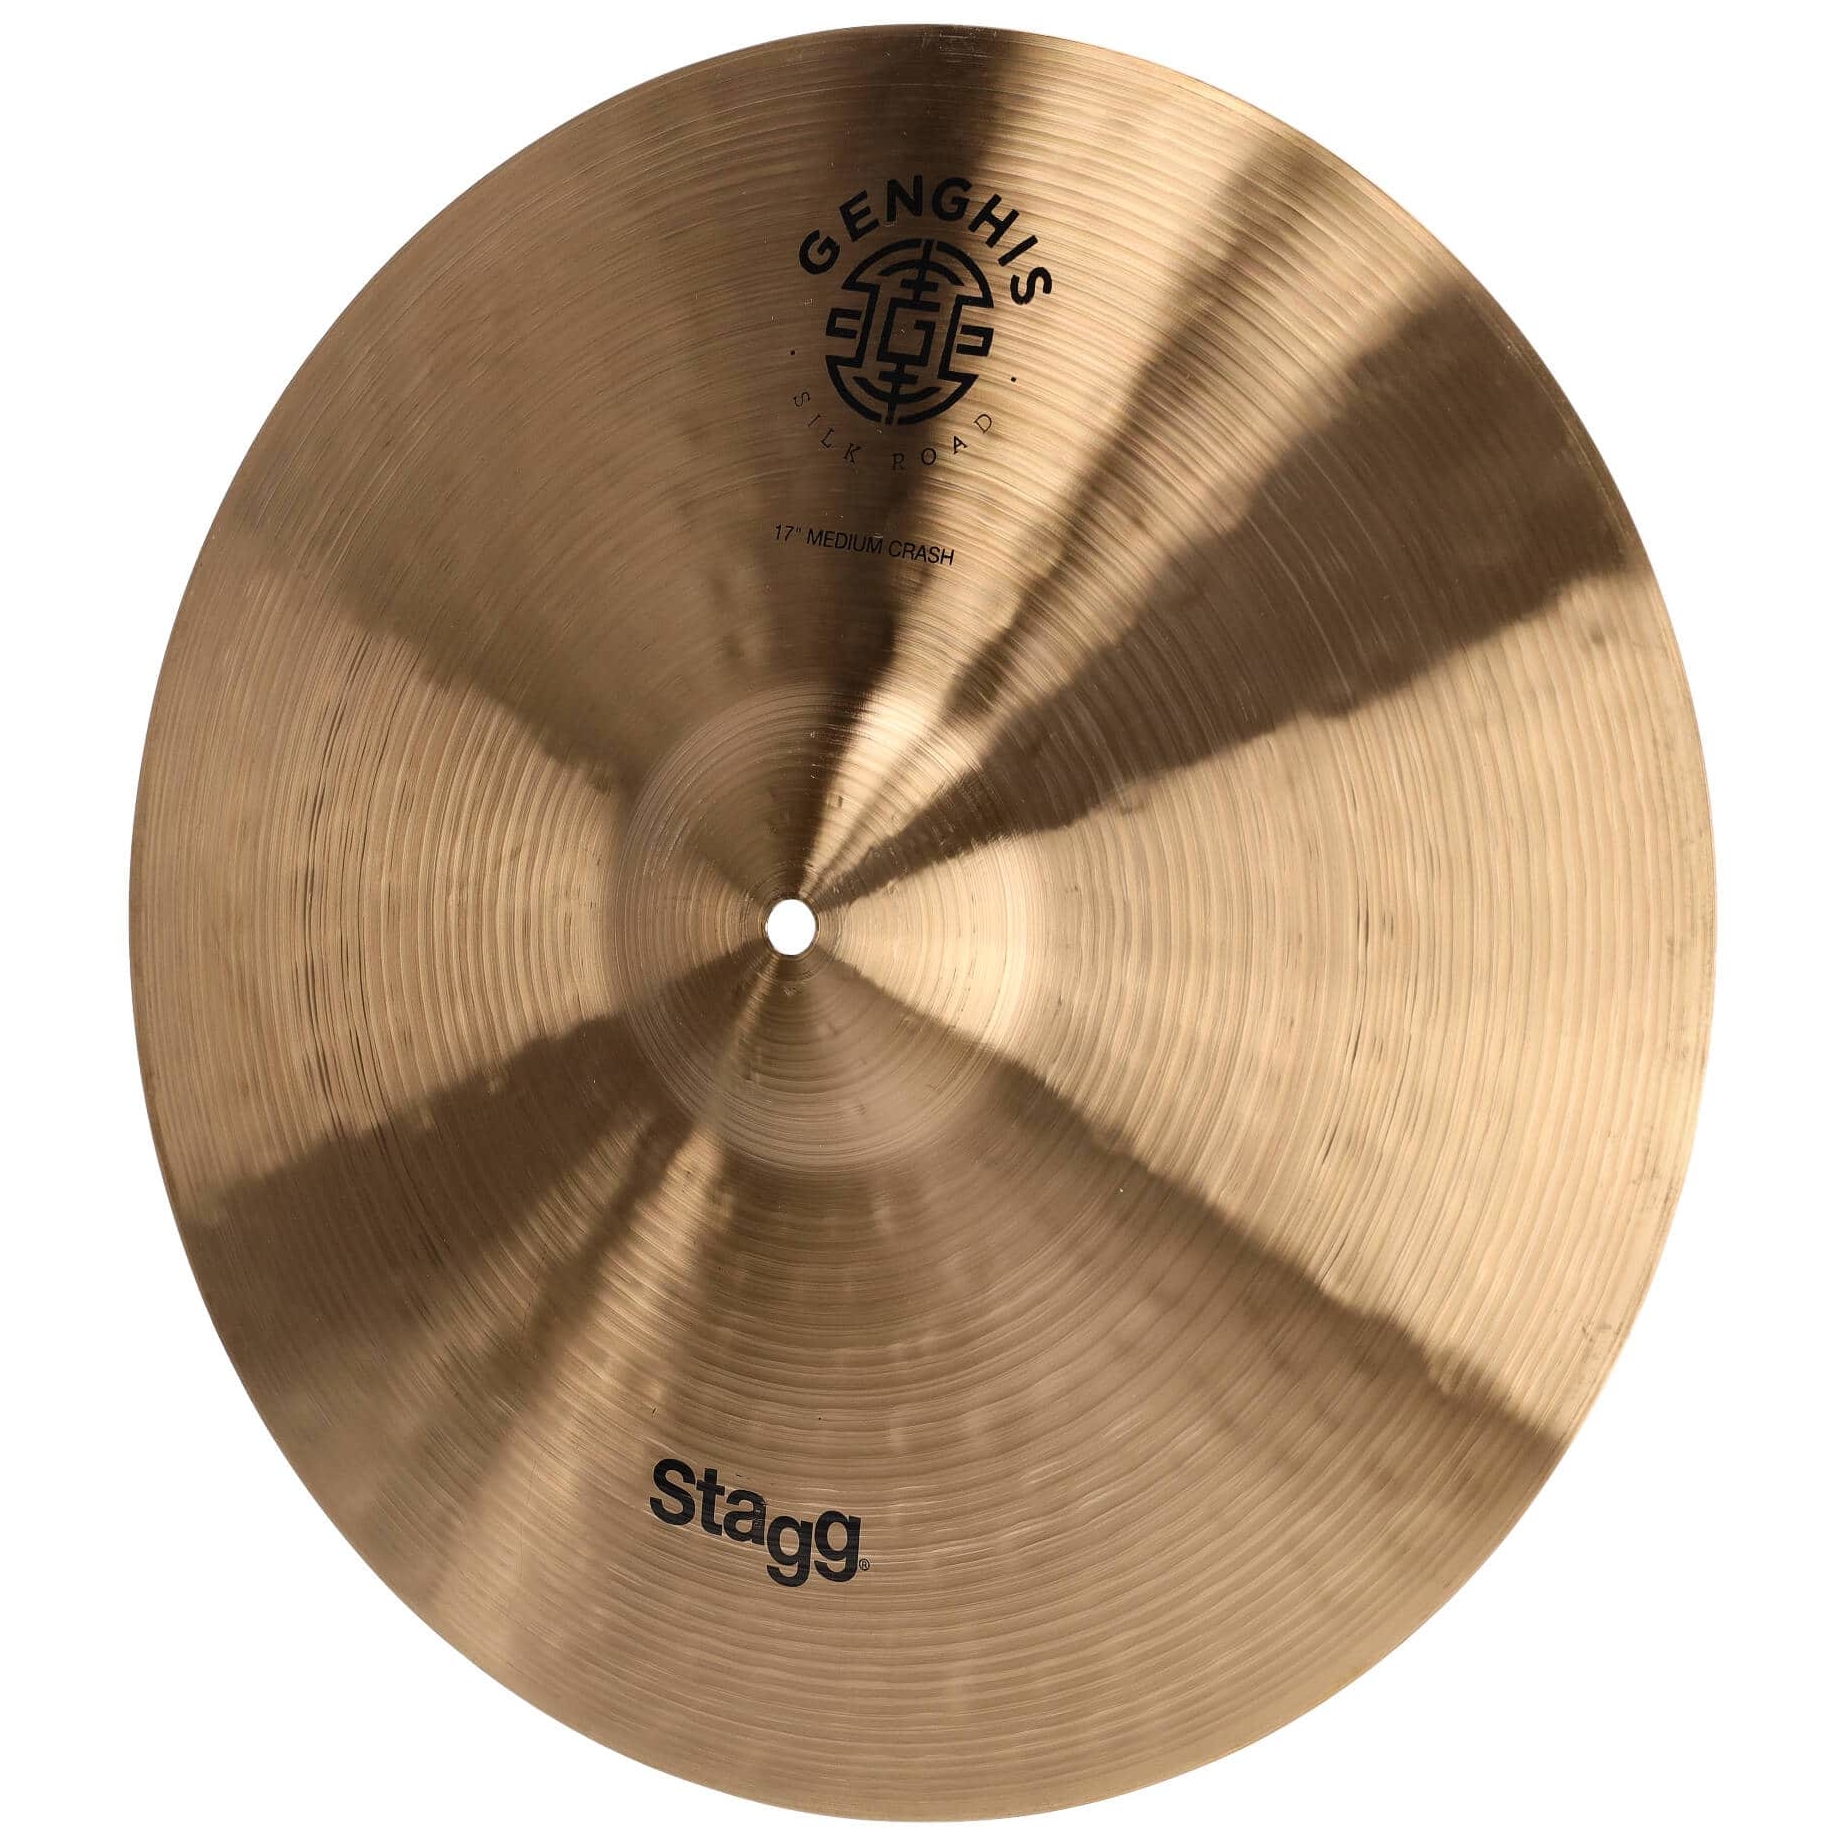 Stagg Genghis Classic Series Crash - 17 Zoll